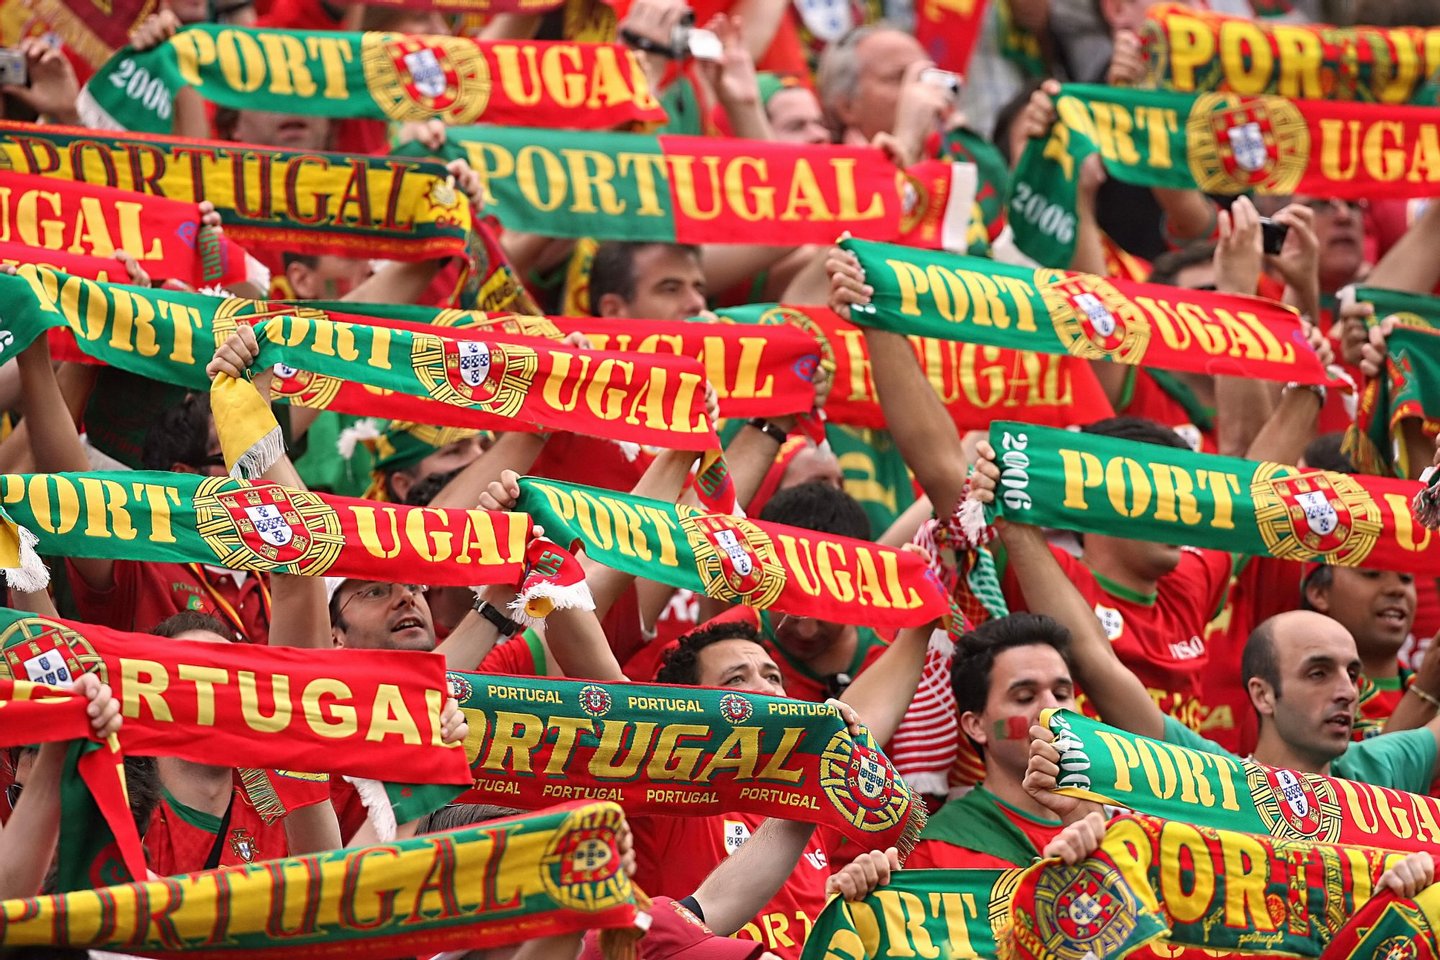 Frankfurt am Main, GERMANY: Portuguese supporters cheer their team prior to the World Cup 2006 group D football game Portugual vs.Iran 17 June 2006 at Frankfurt stadium. AFP PHOTO PATRIK STOLLARZ (Photo credit should read PATRIK STOLLARZ/AFP/Getty Images)